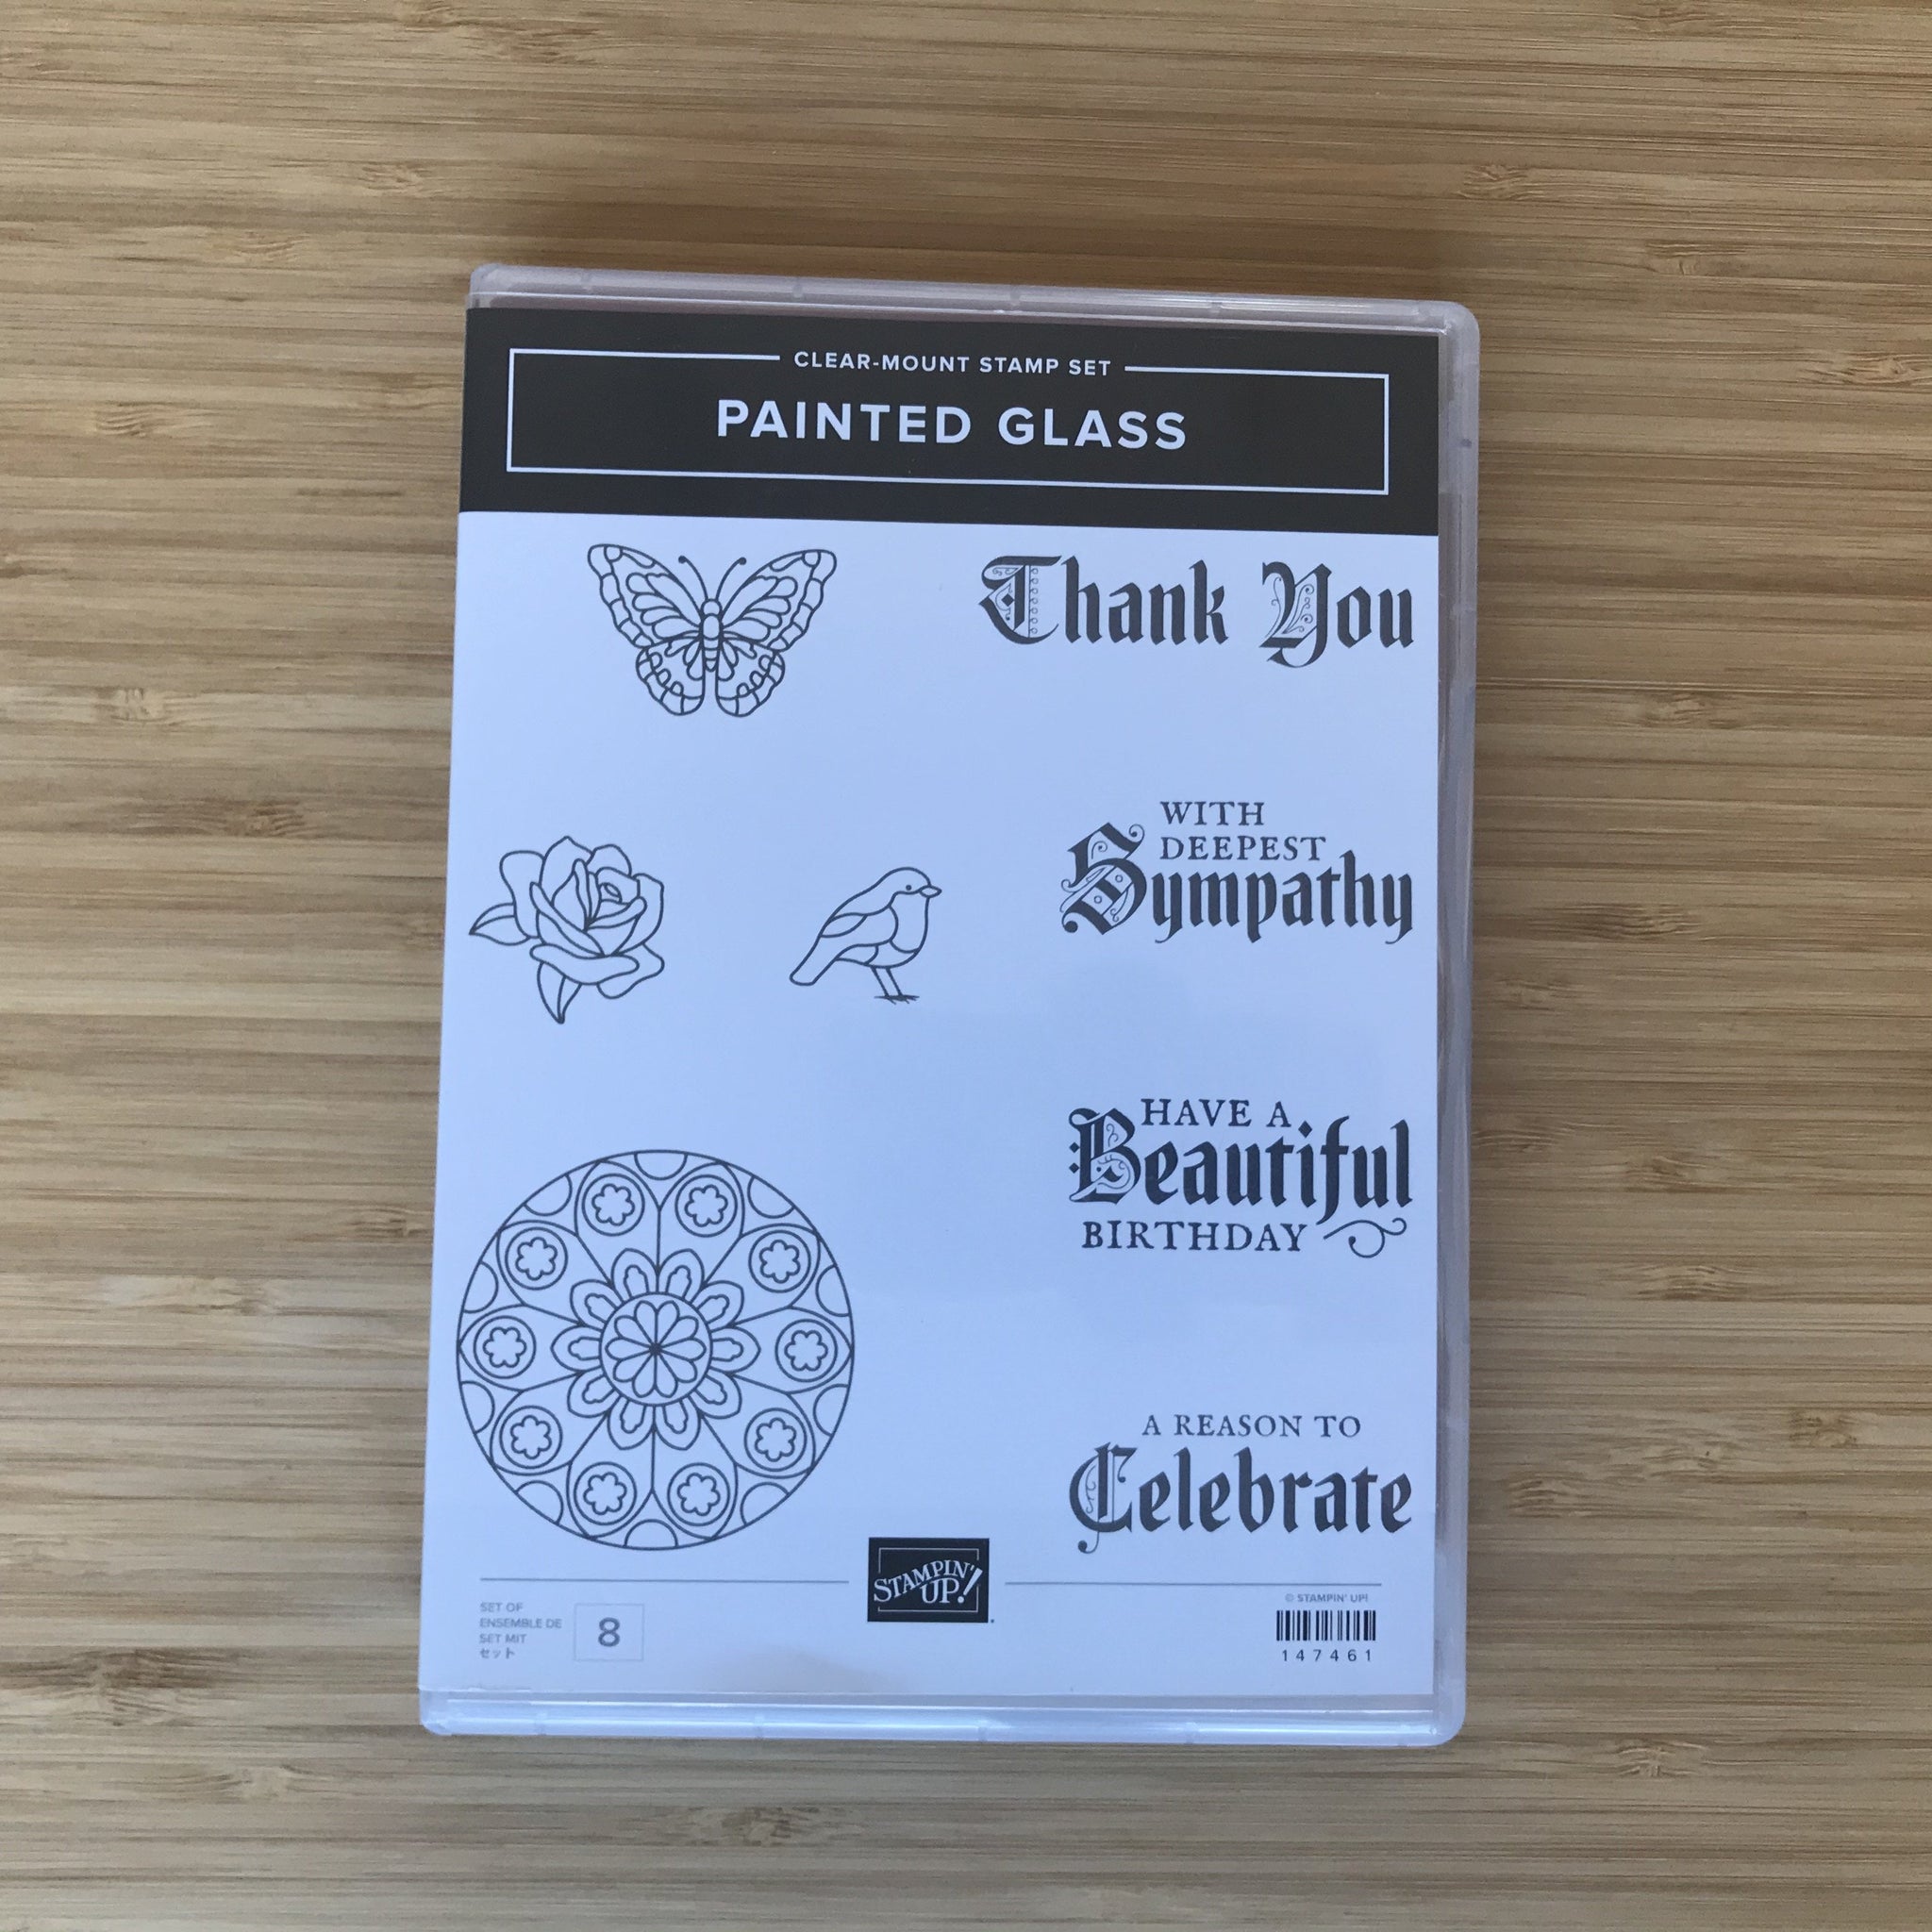 Painted Glass | Retired Clear-Mount Stamp Set & Dies | Stampin' Up!®